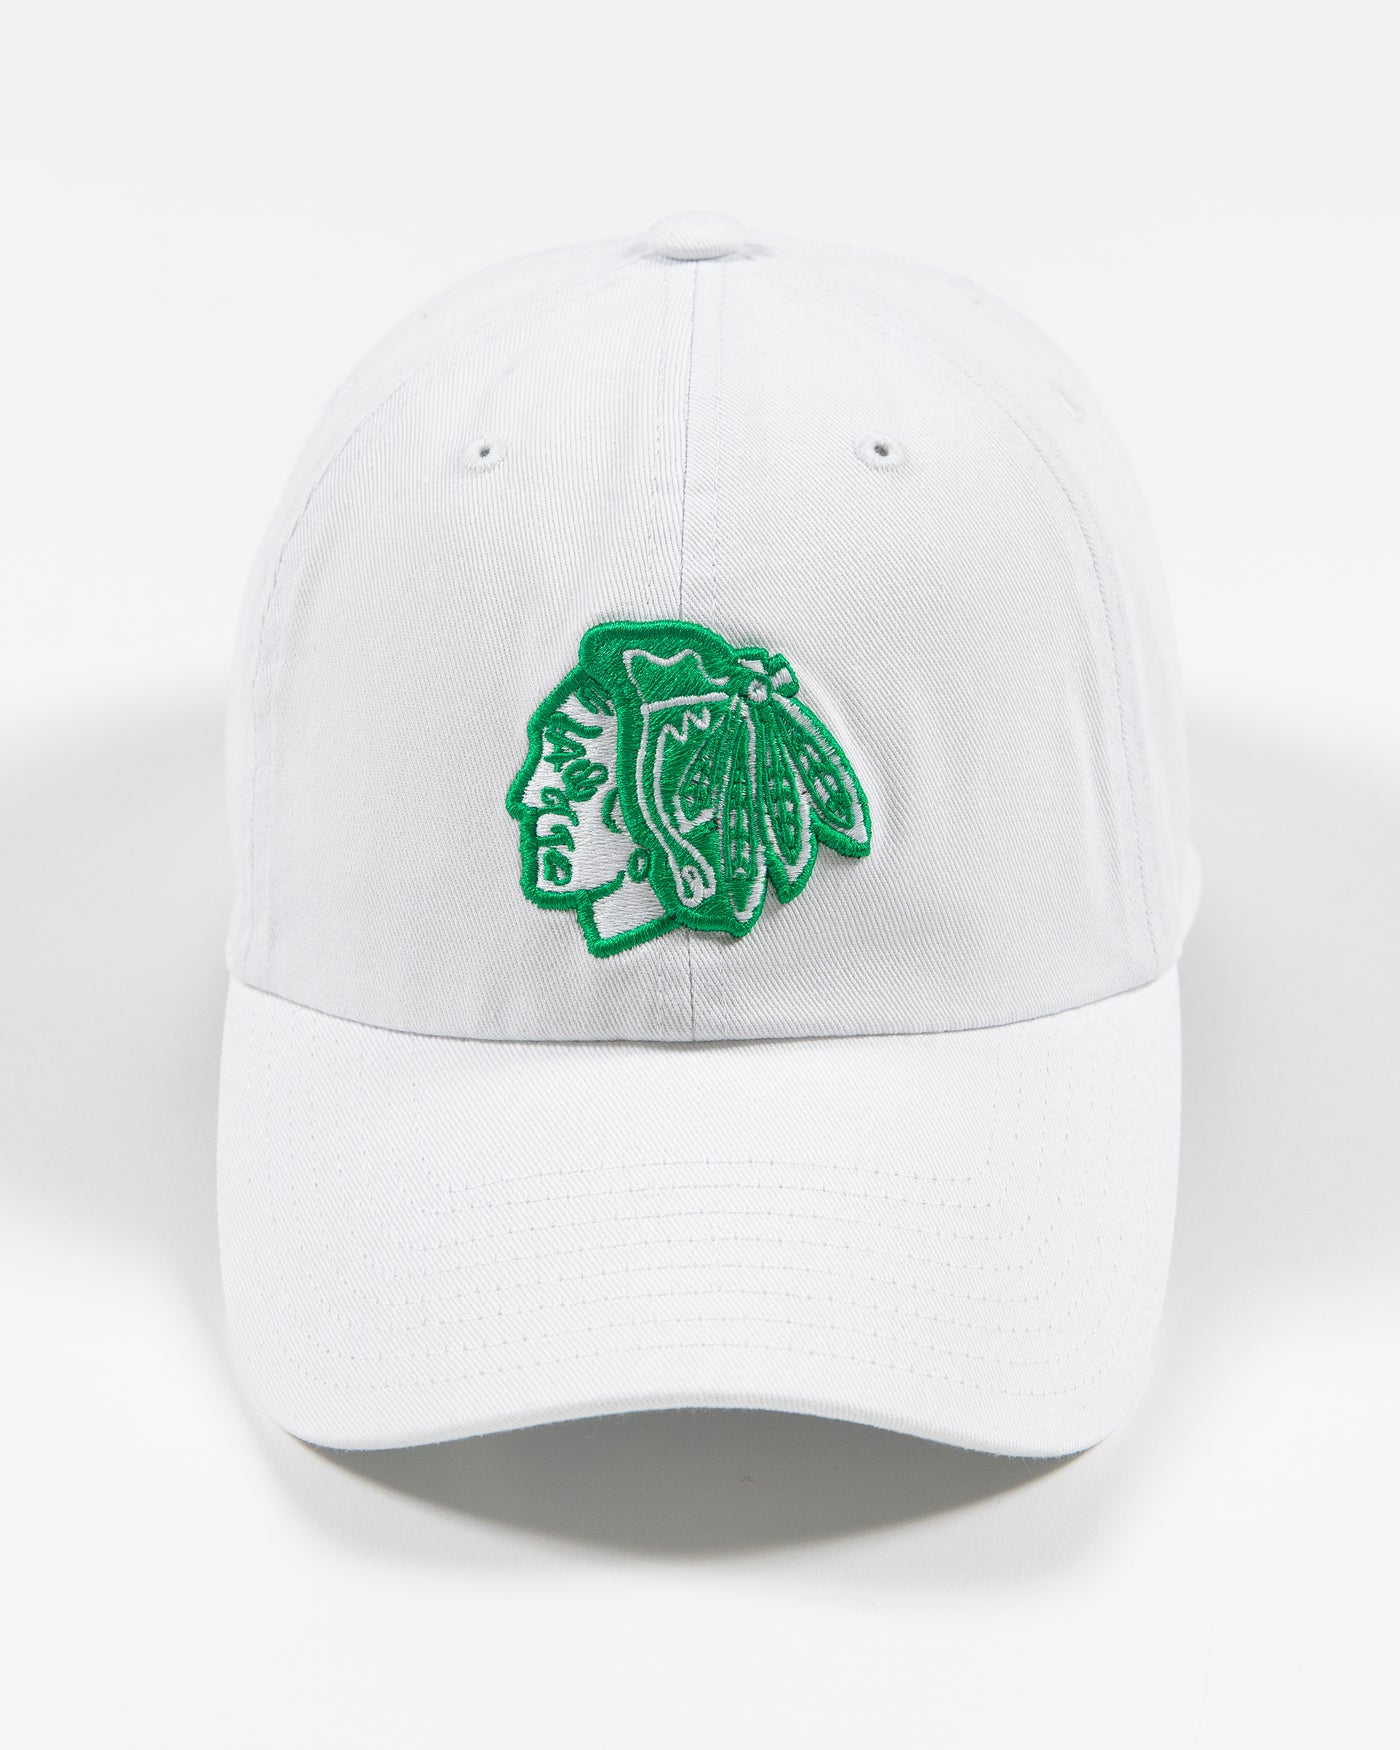 white adjustable cap with green Chicago Blackhawks primary logo - front lay flat